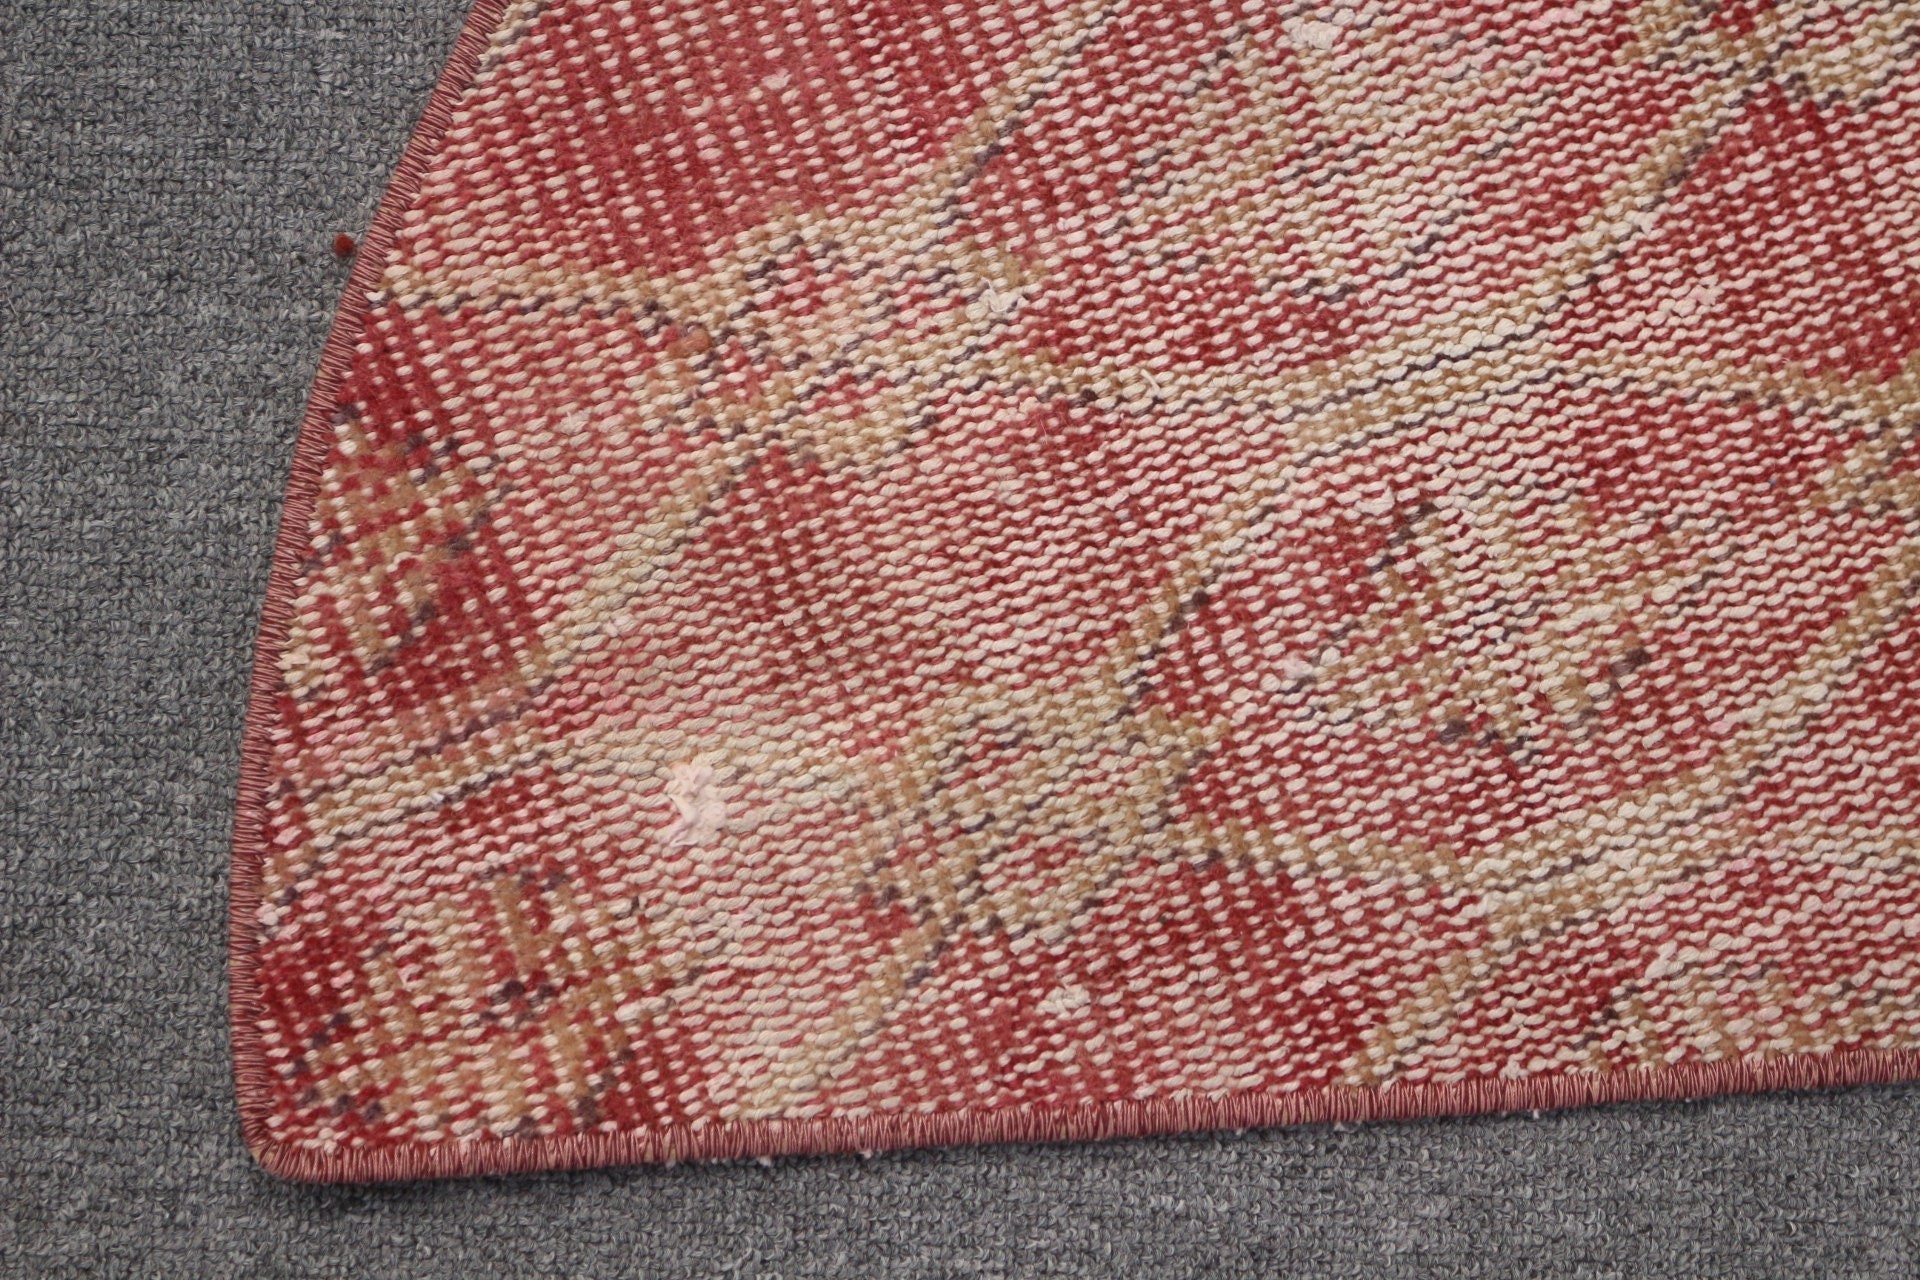 Car Mat Rug, Vintage Rugs, Kitchen Rugs, Red Antique Rugs, Turkish Rug, 2.5x1.5 ft Small Rug, Door Mat Rug, Rugs for Bedroom, Moroccan Rug